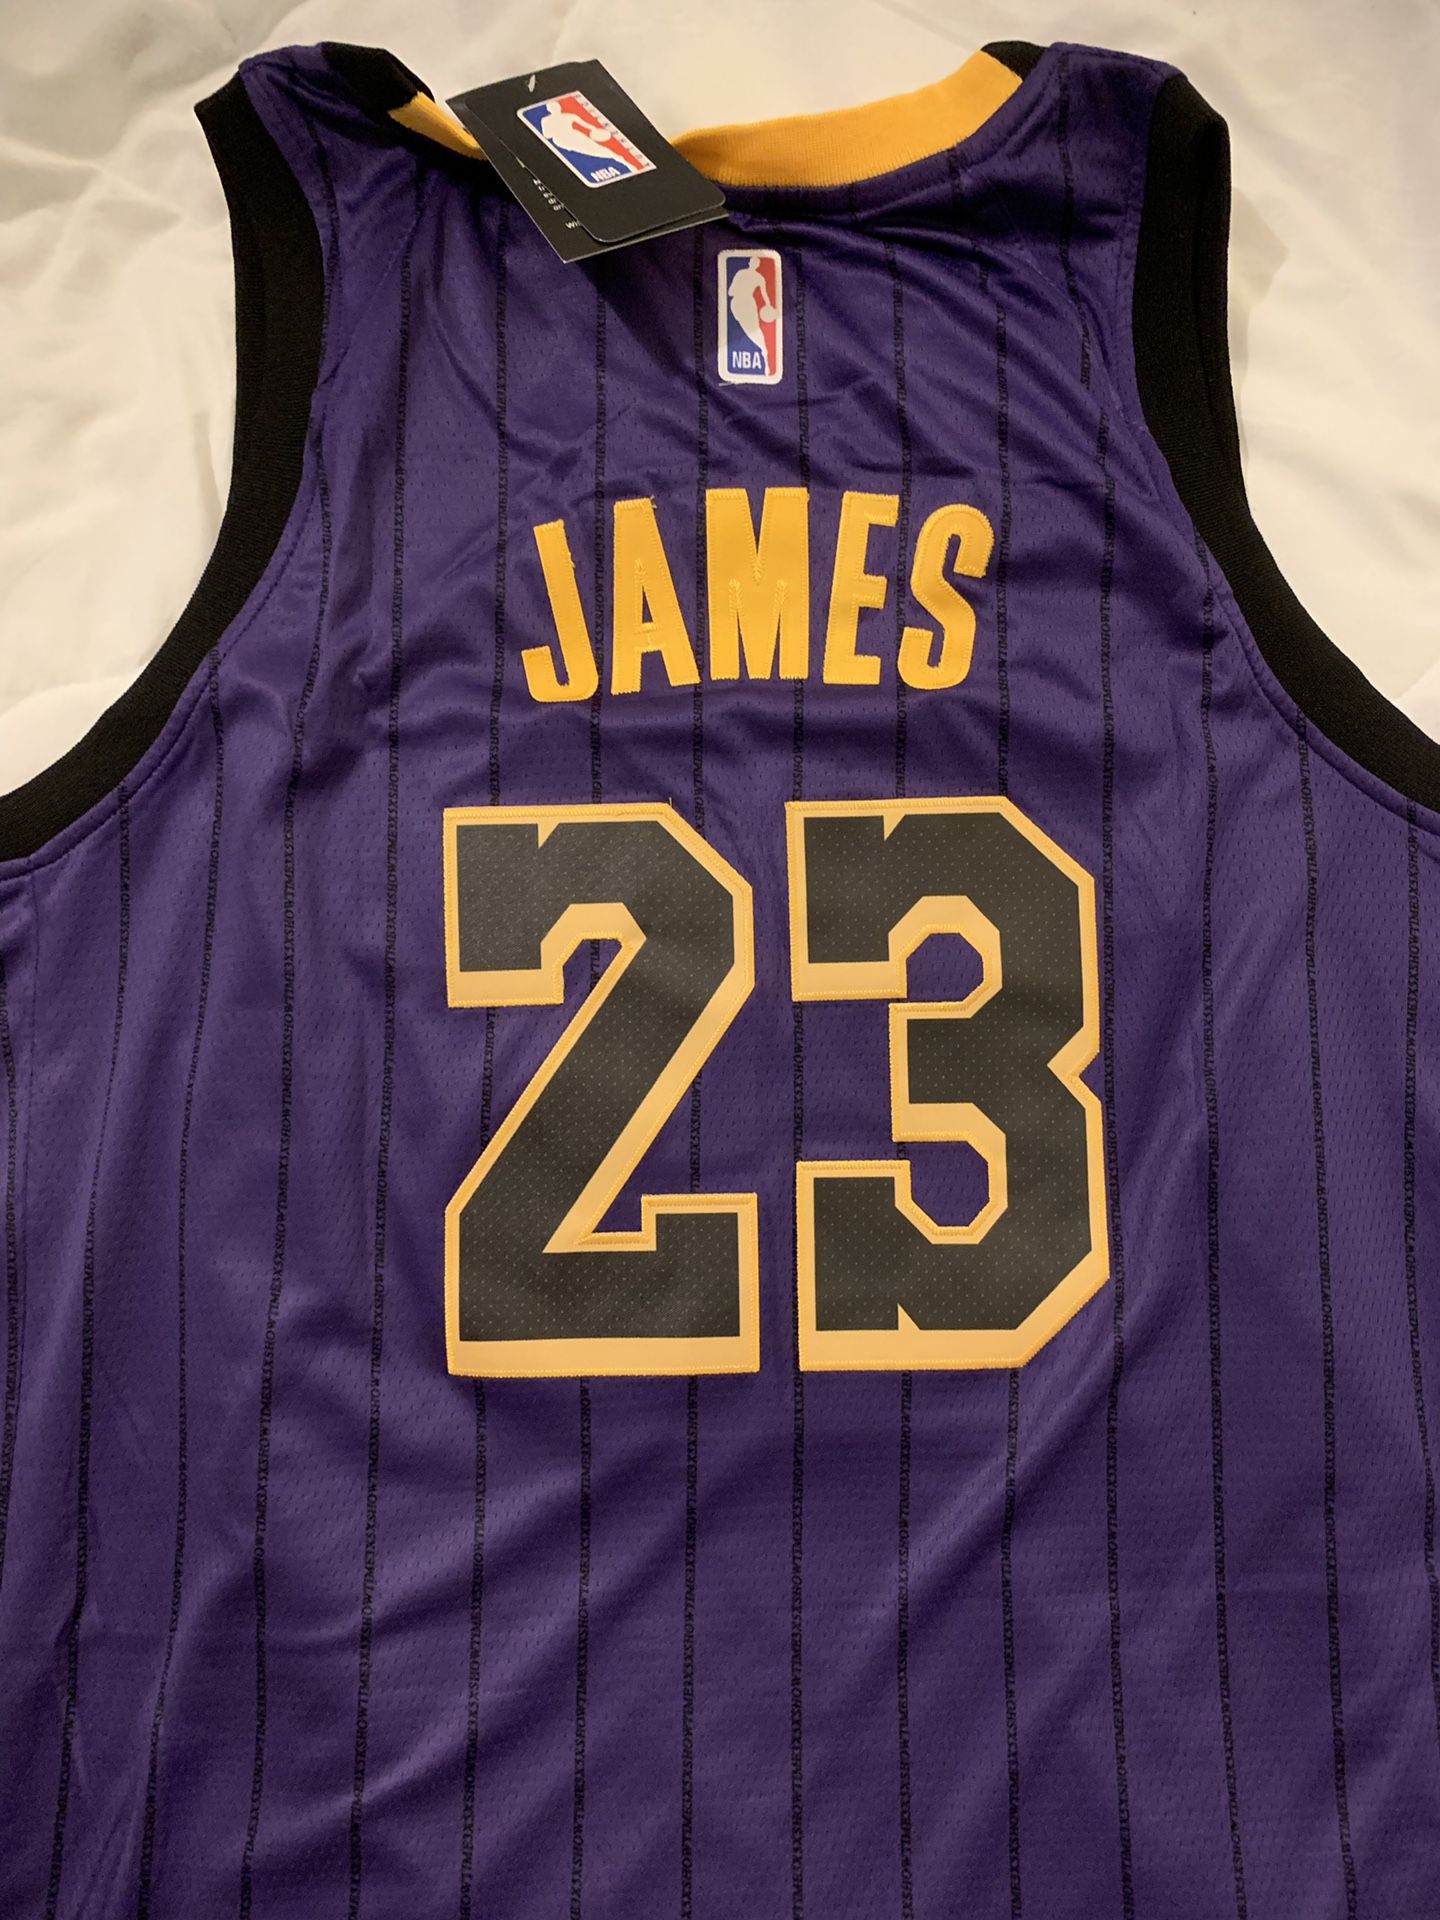 Nwt Stitched 2018/2019 LA Lakers Lebron James Jersey for Sale in